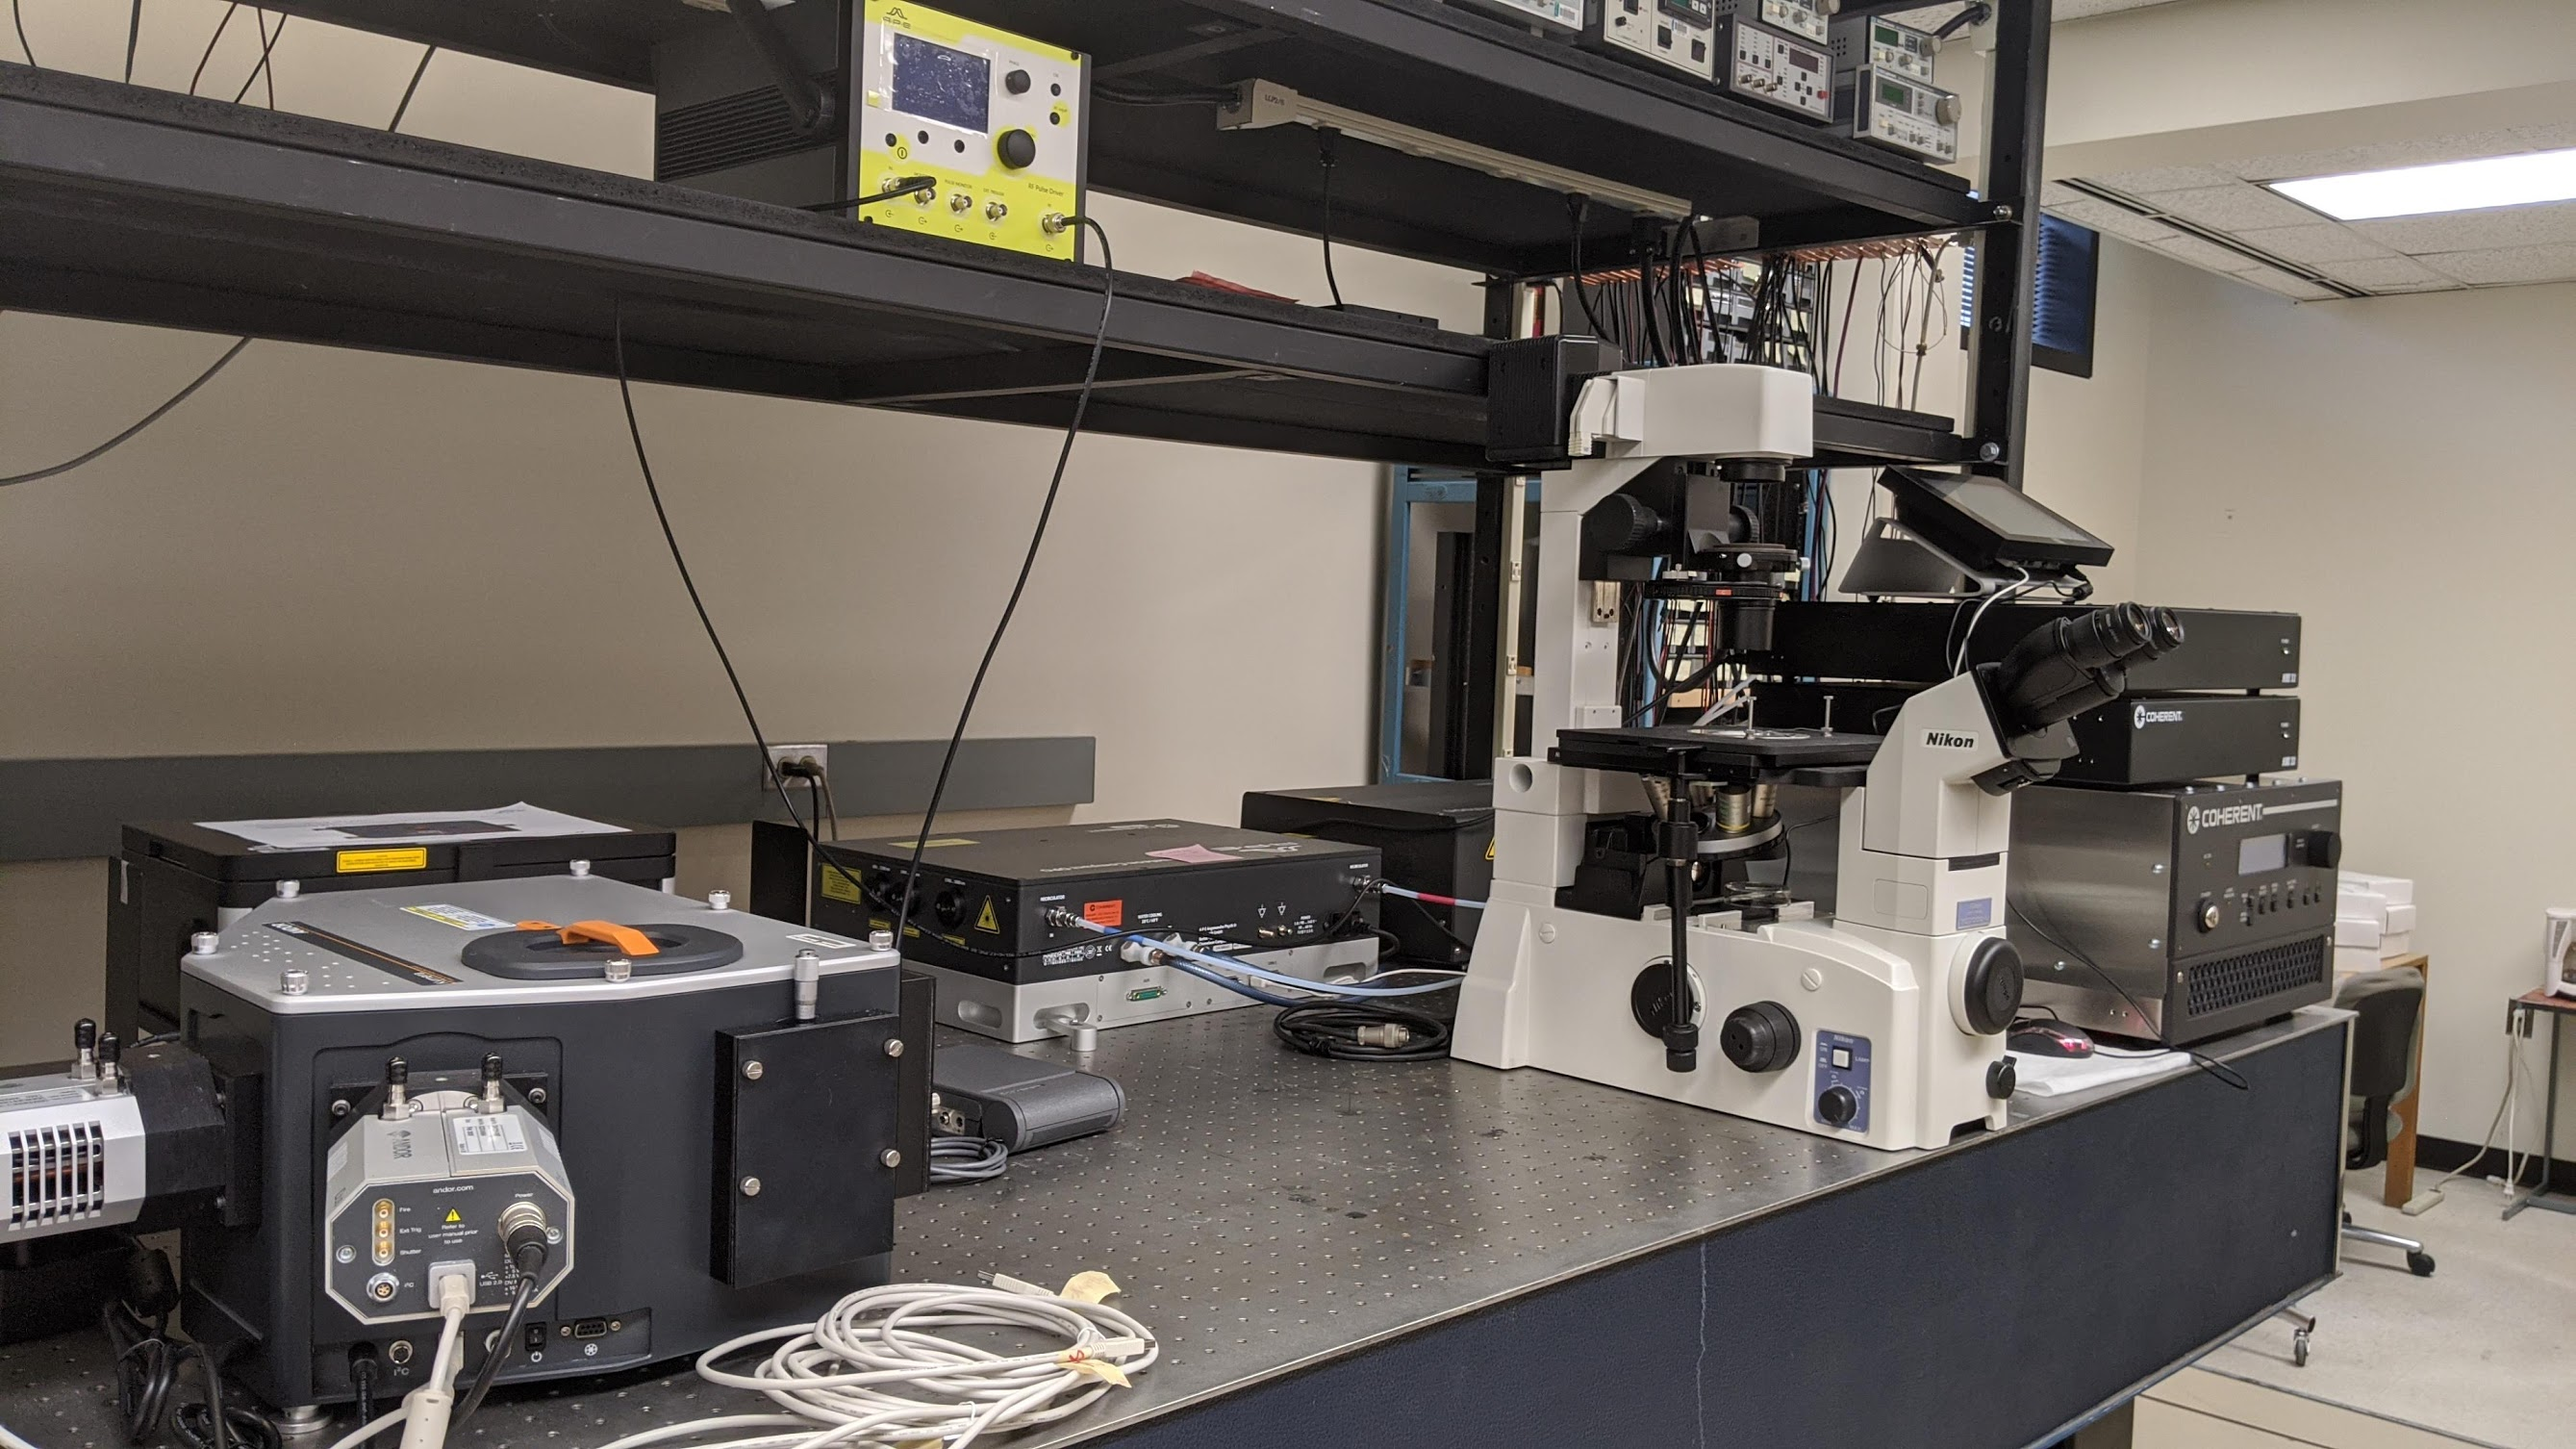 This photo shows a laboratory bench with a high power microscope and other equipment on it.